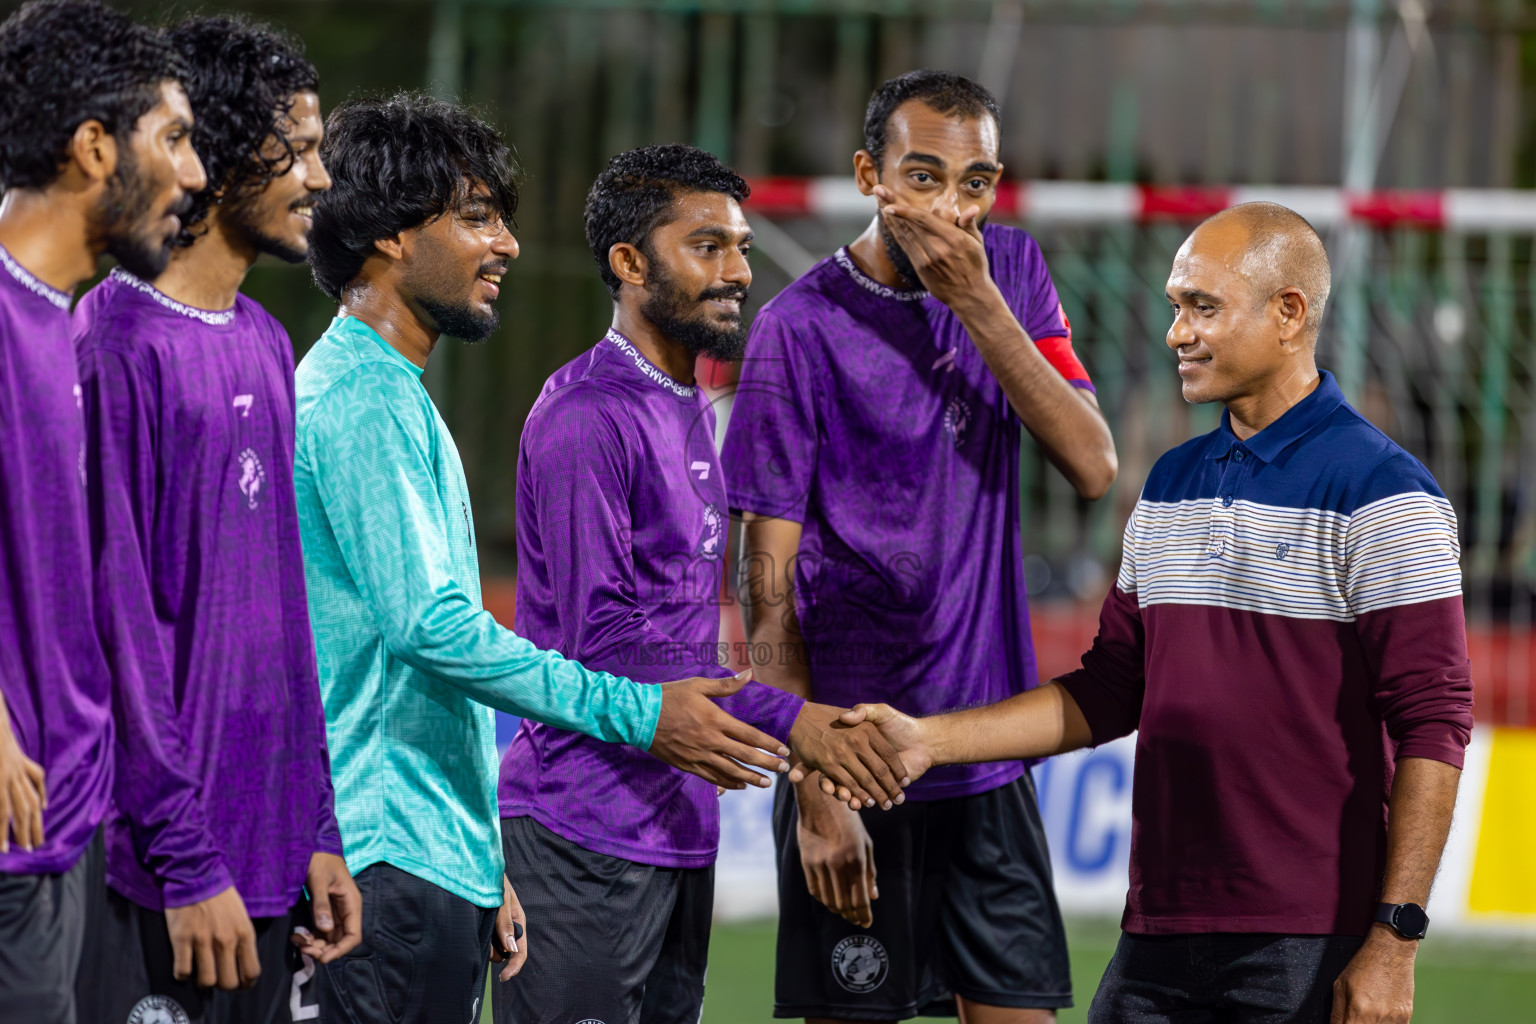 Dhandimagu vs GA Kanduhulhudhoo in Zone Round on Day 30 of Golden Futsal Challenge 2024, held on Tuesday , 14th February 2024 in Hulhumale', Maldives
Photos: Ismail Thoriq / images.mv